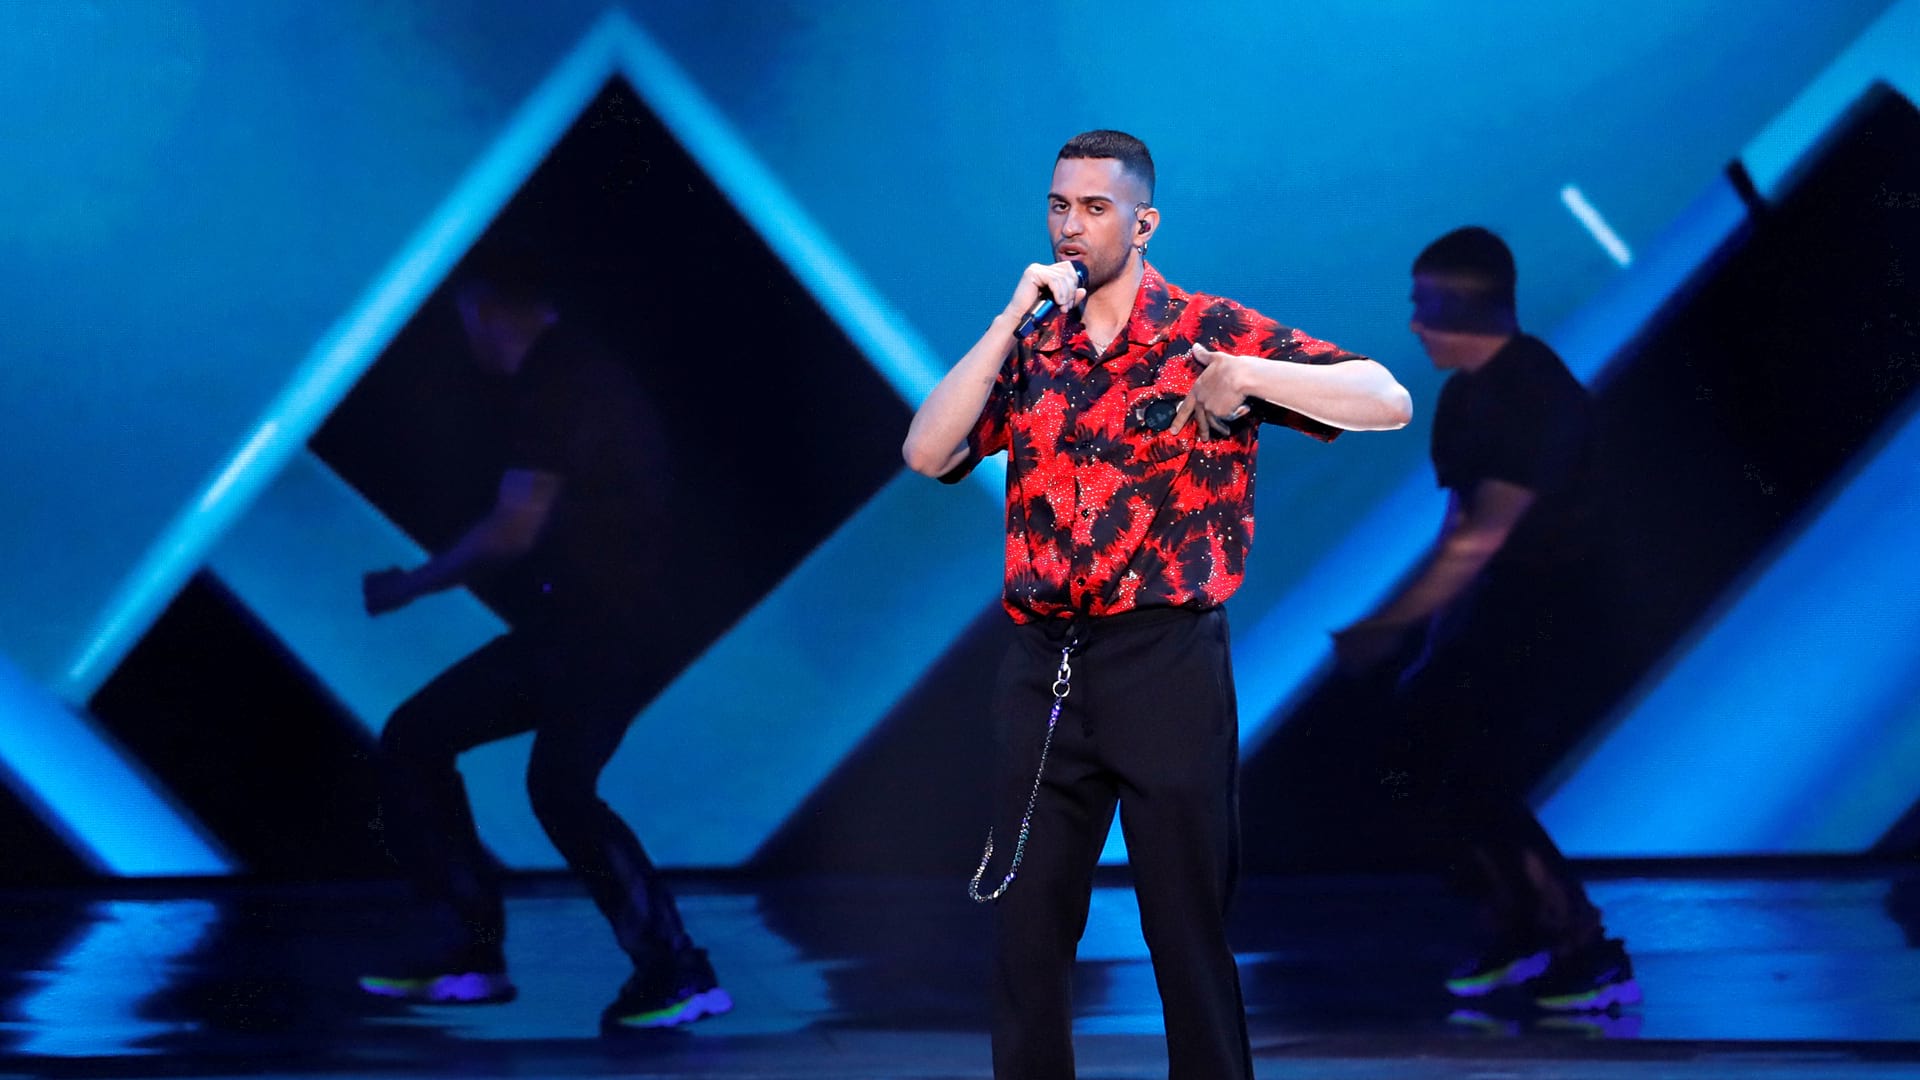 Image result for mahmood eurovision 2019